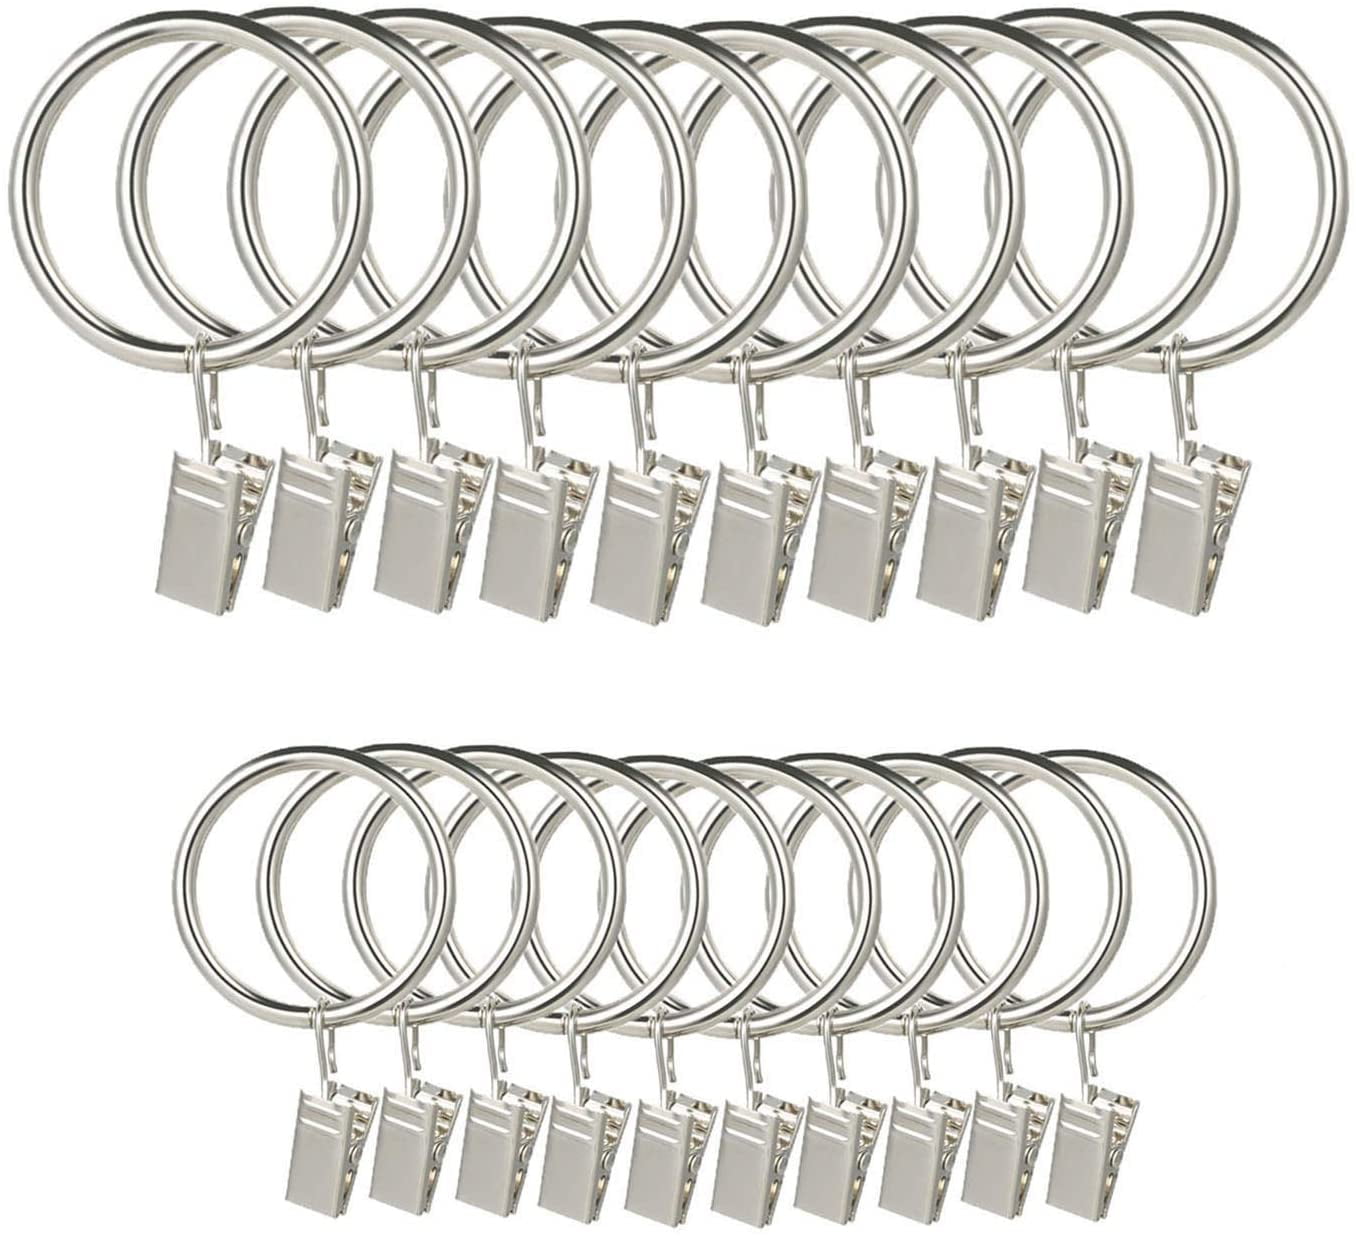 Metal Curtain Rings Hanging Hooks for Curtains Rods Pole Voile Heavy Duty Rings.